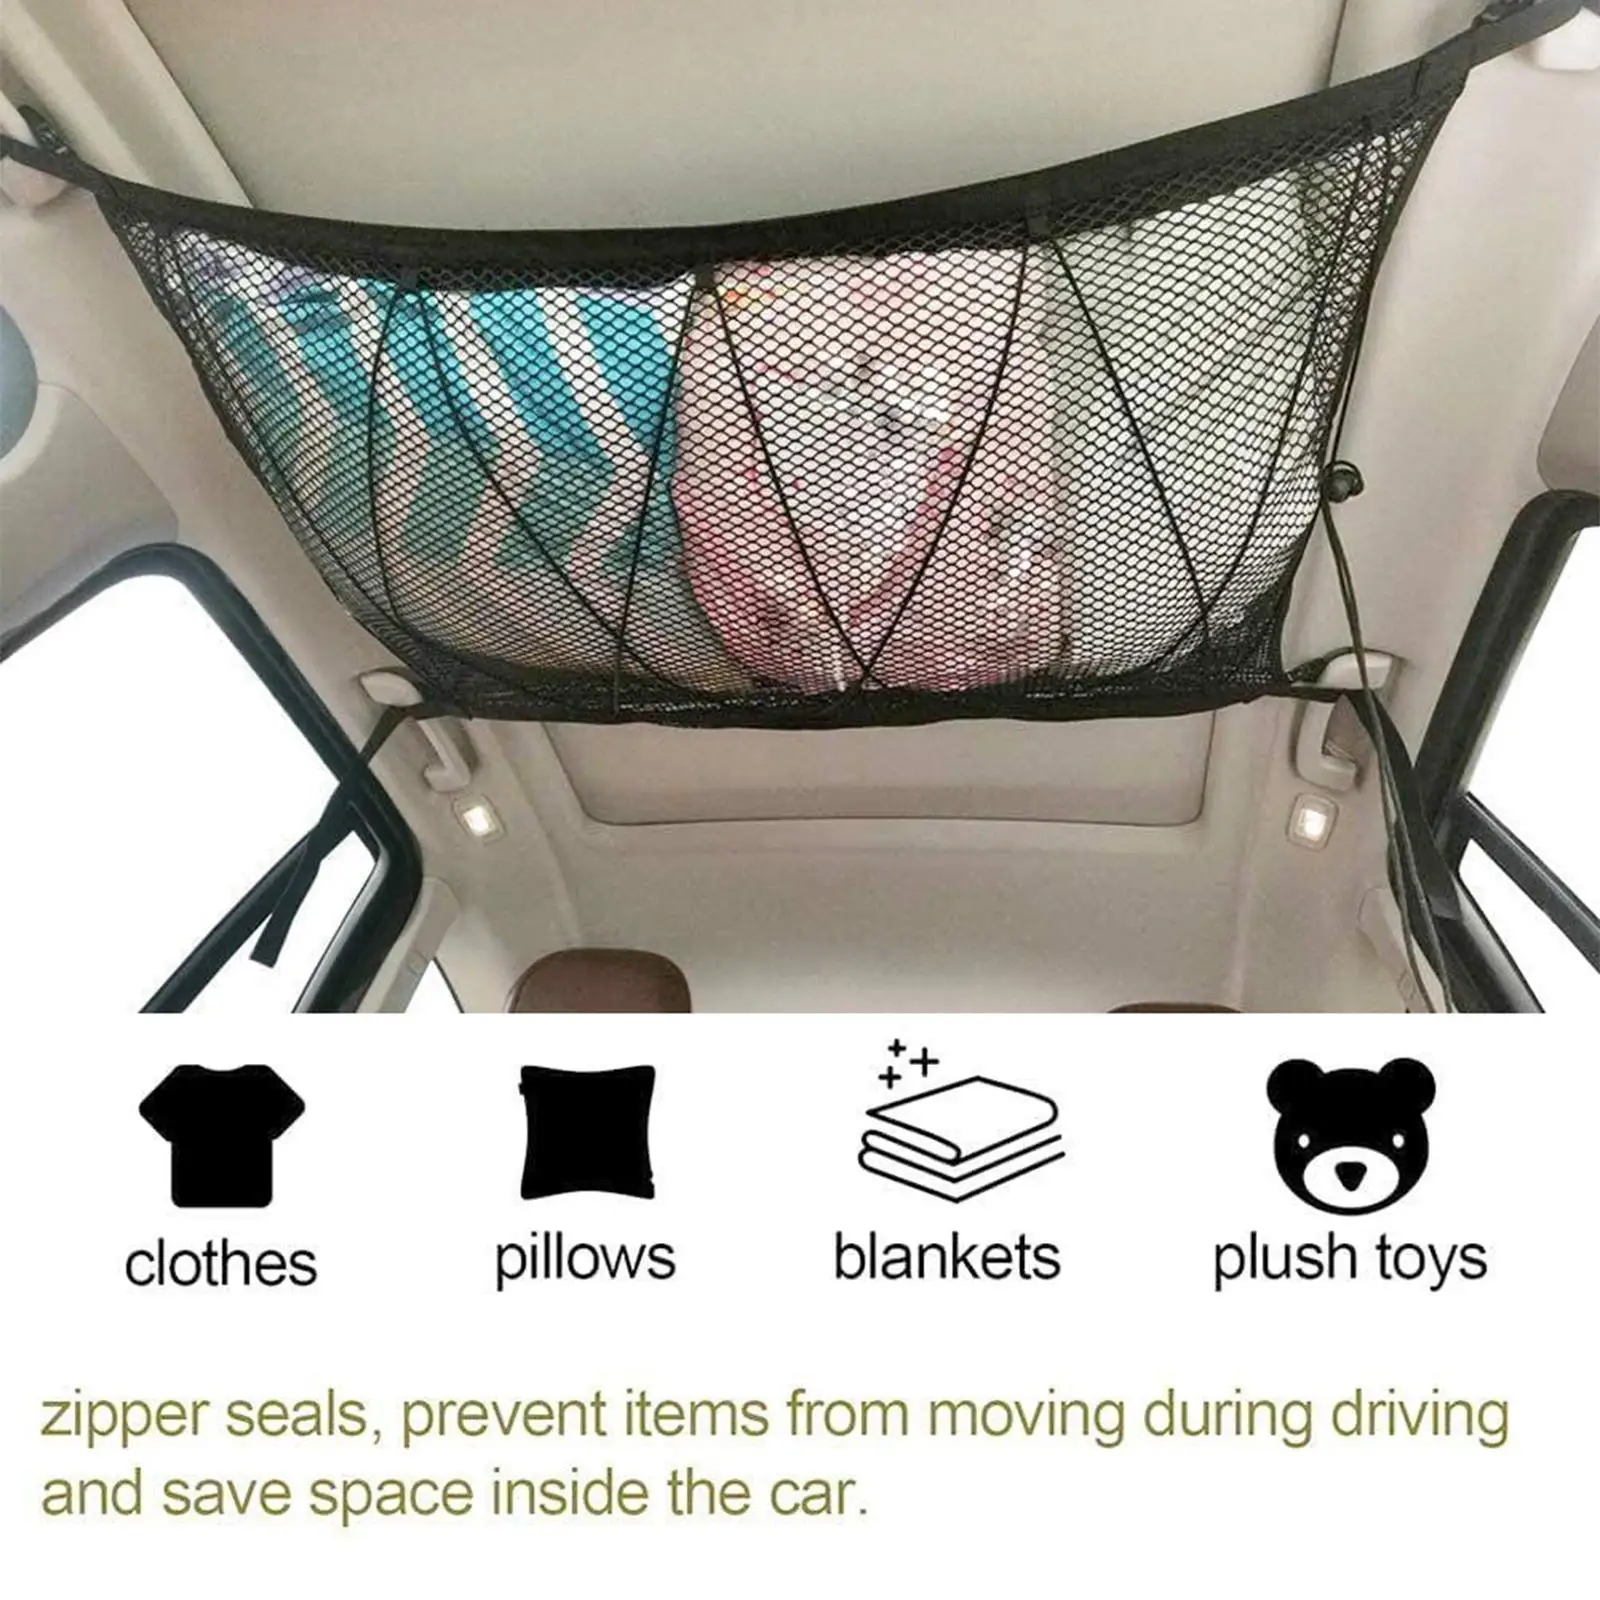 SUV Car Ceiling Cargo Pocket Strengthen Load Bearing Double Layer Roof Organizer for Sundries Quilt Toy Travel